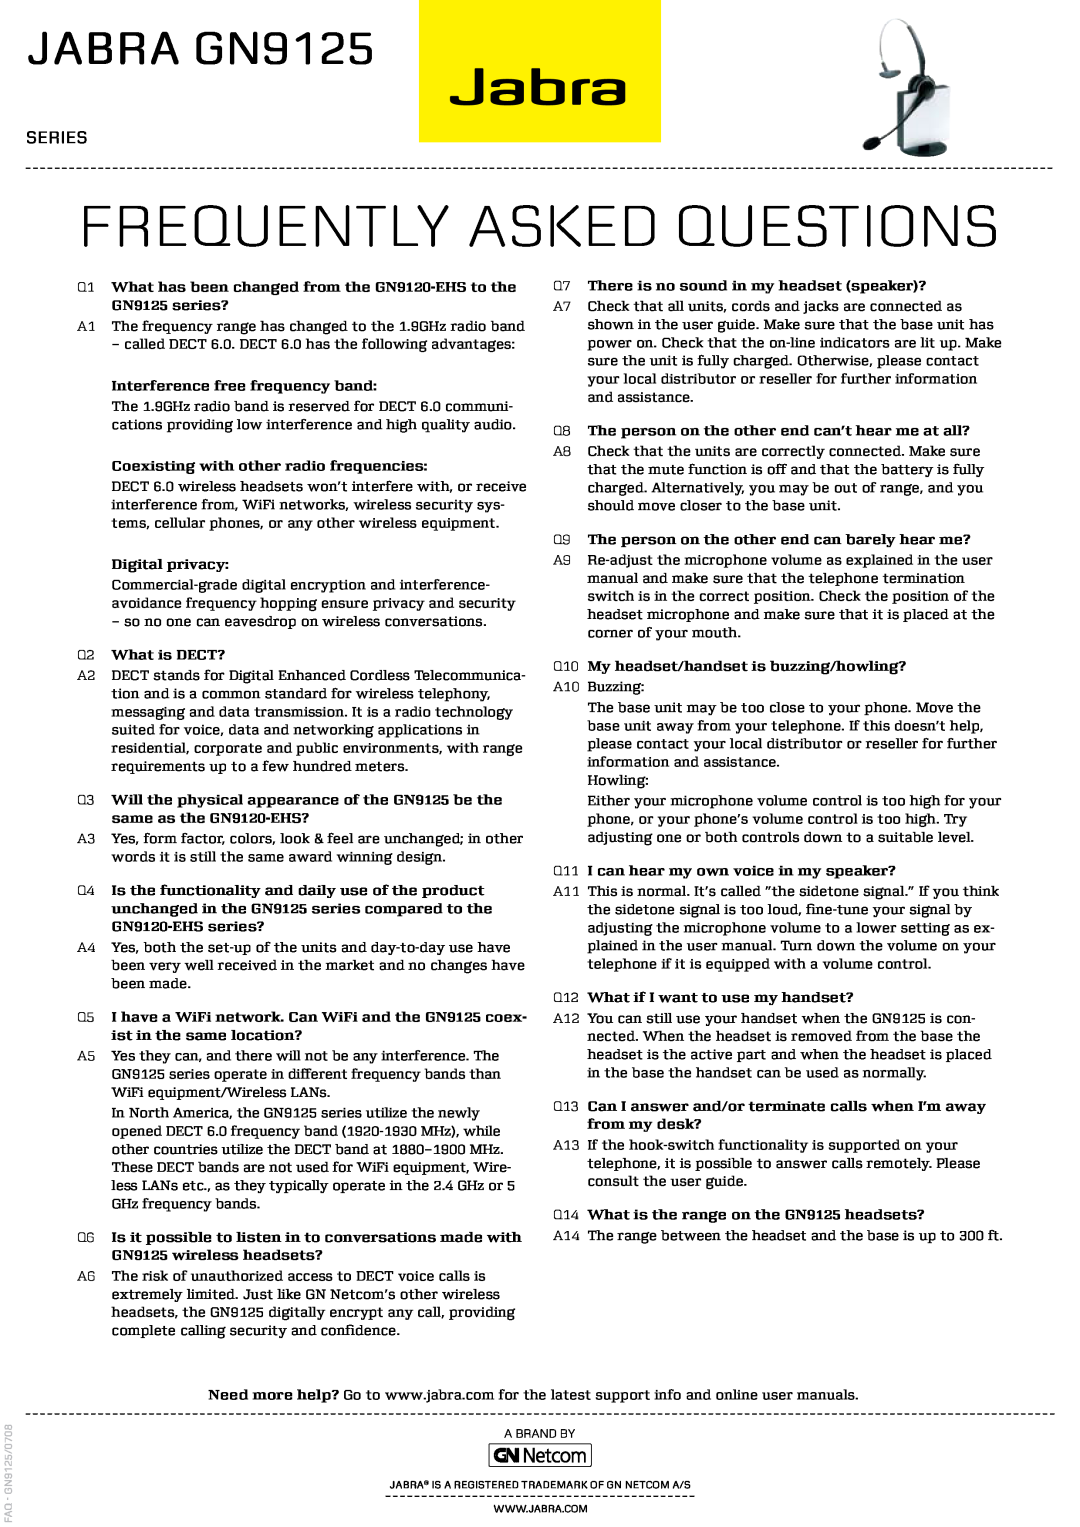 Jabra user manual Frequently asked questions, Jabra GN9125, Series 